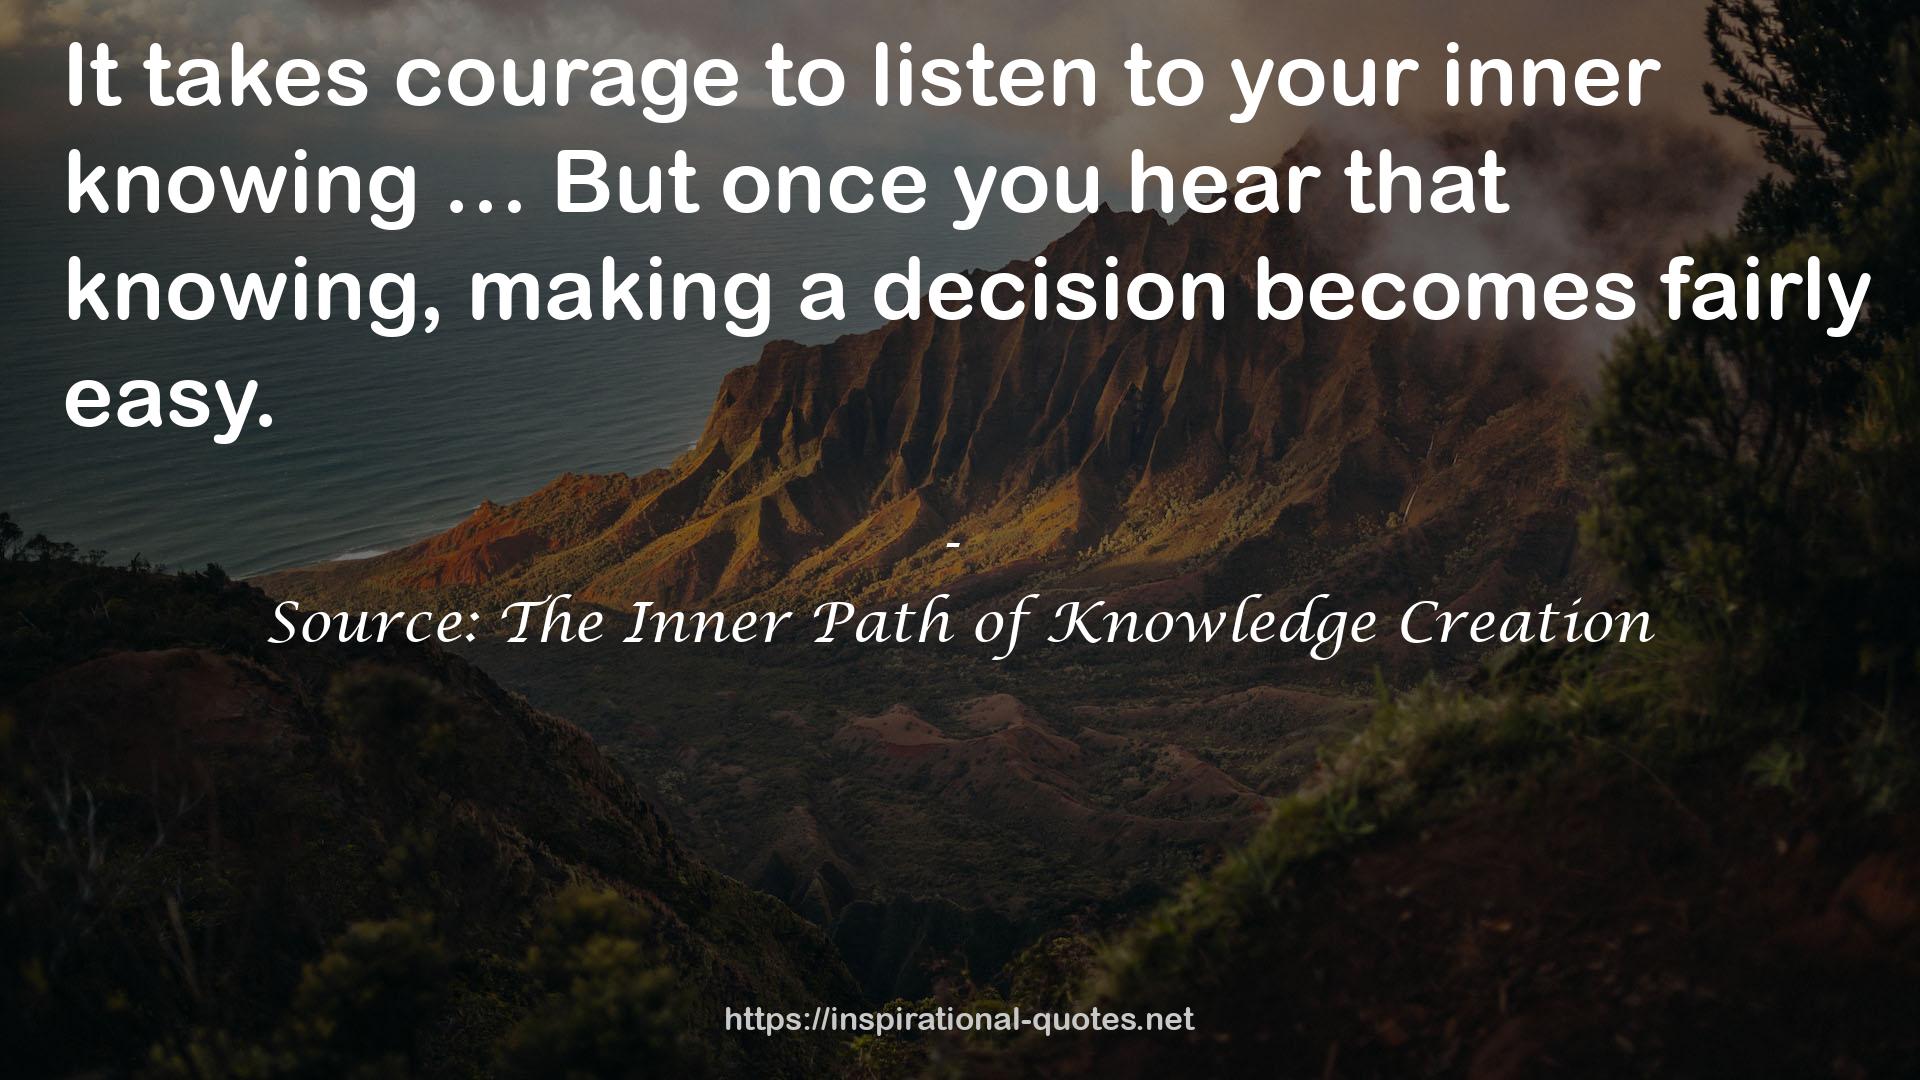 Source: The Inner Path of Knowledge Creation QUOTES